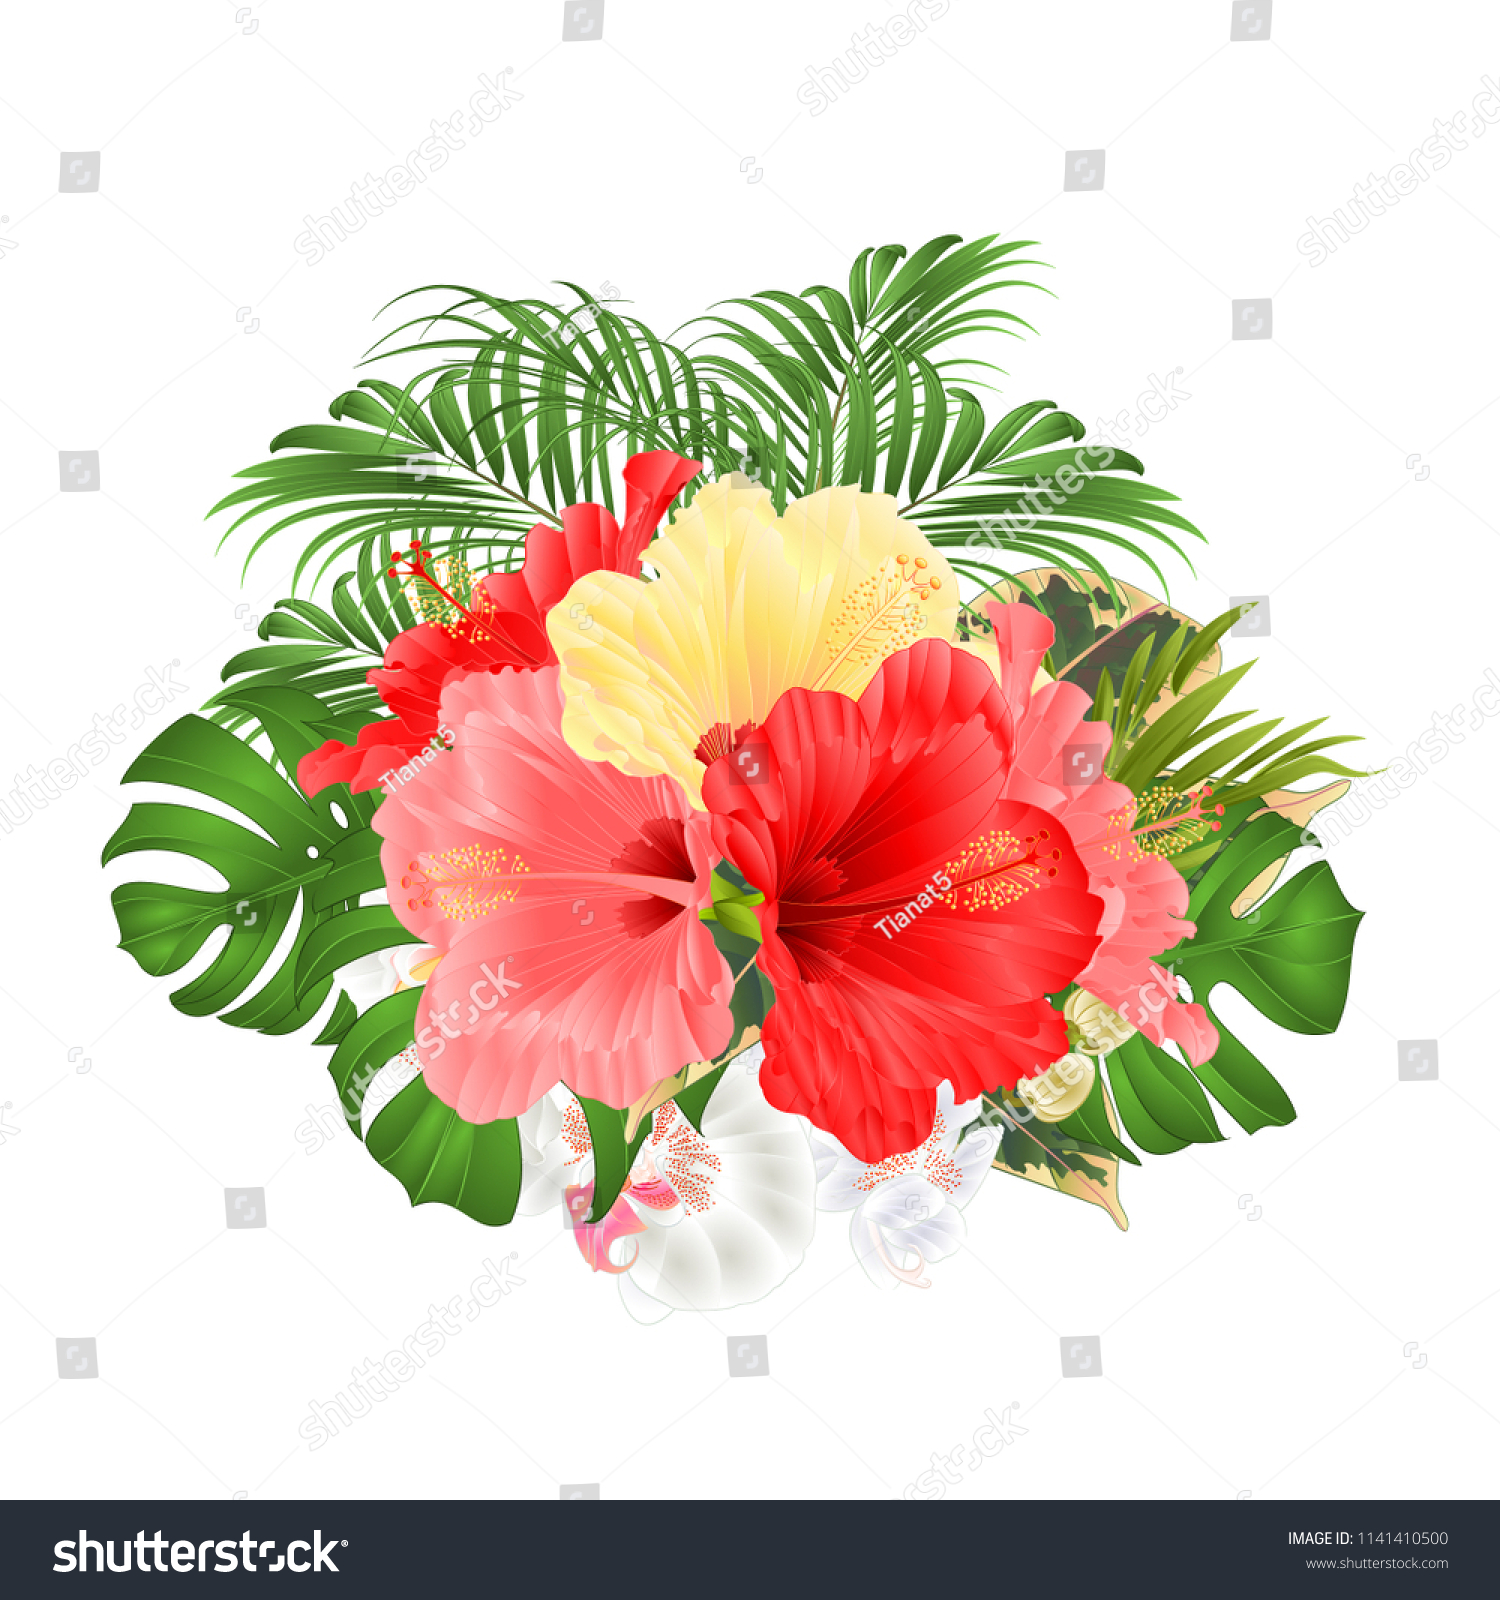 Bouquet Tropical Flowers Floral Arrangement Red Stock Vector Royalty Free 1141410500